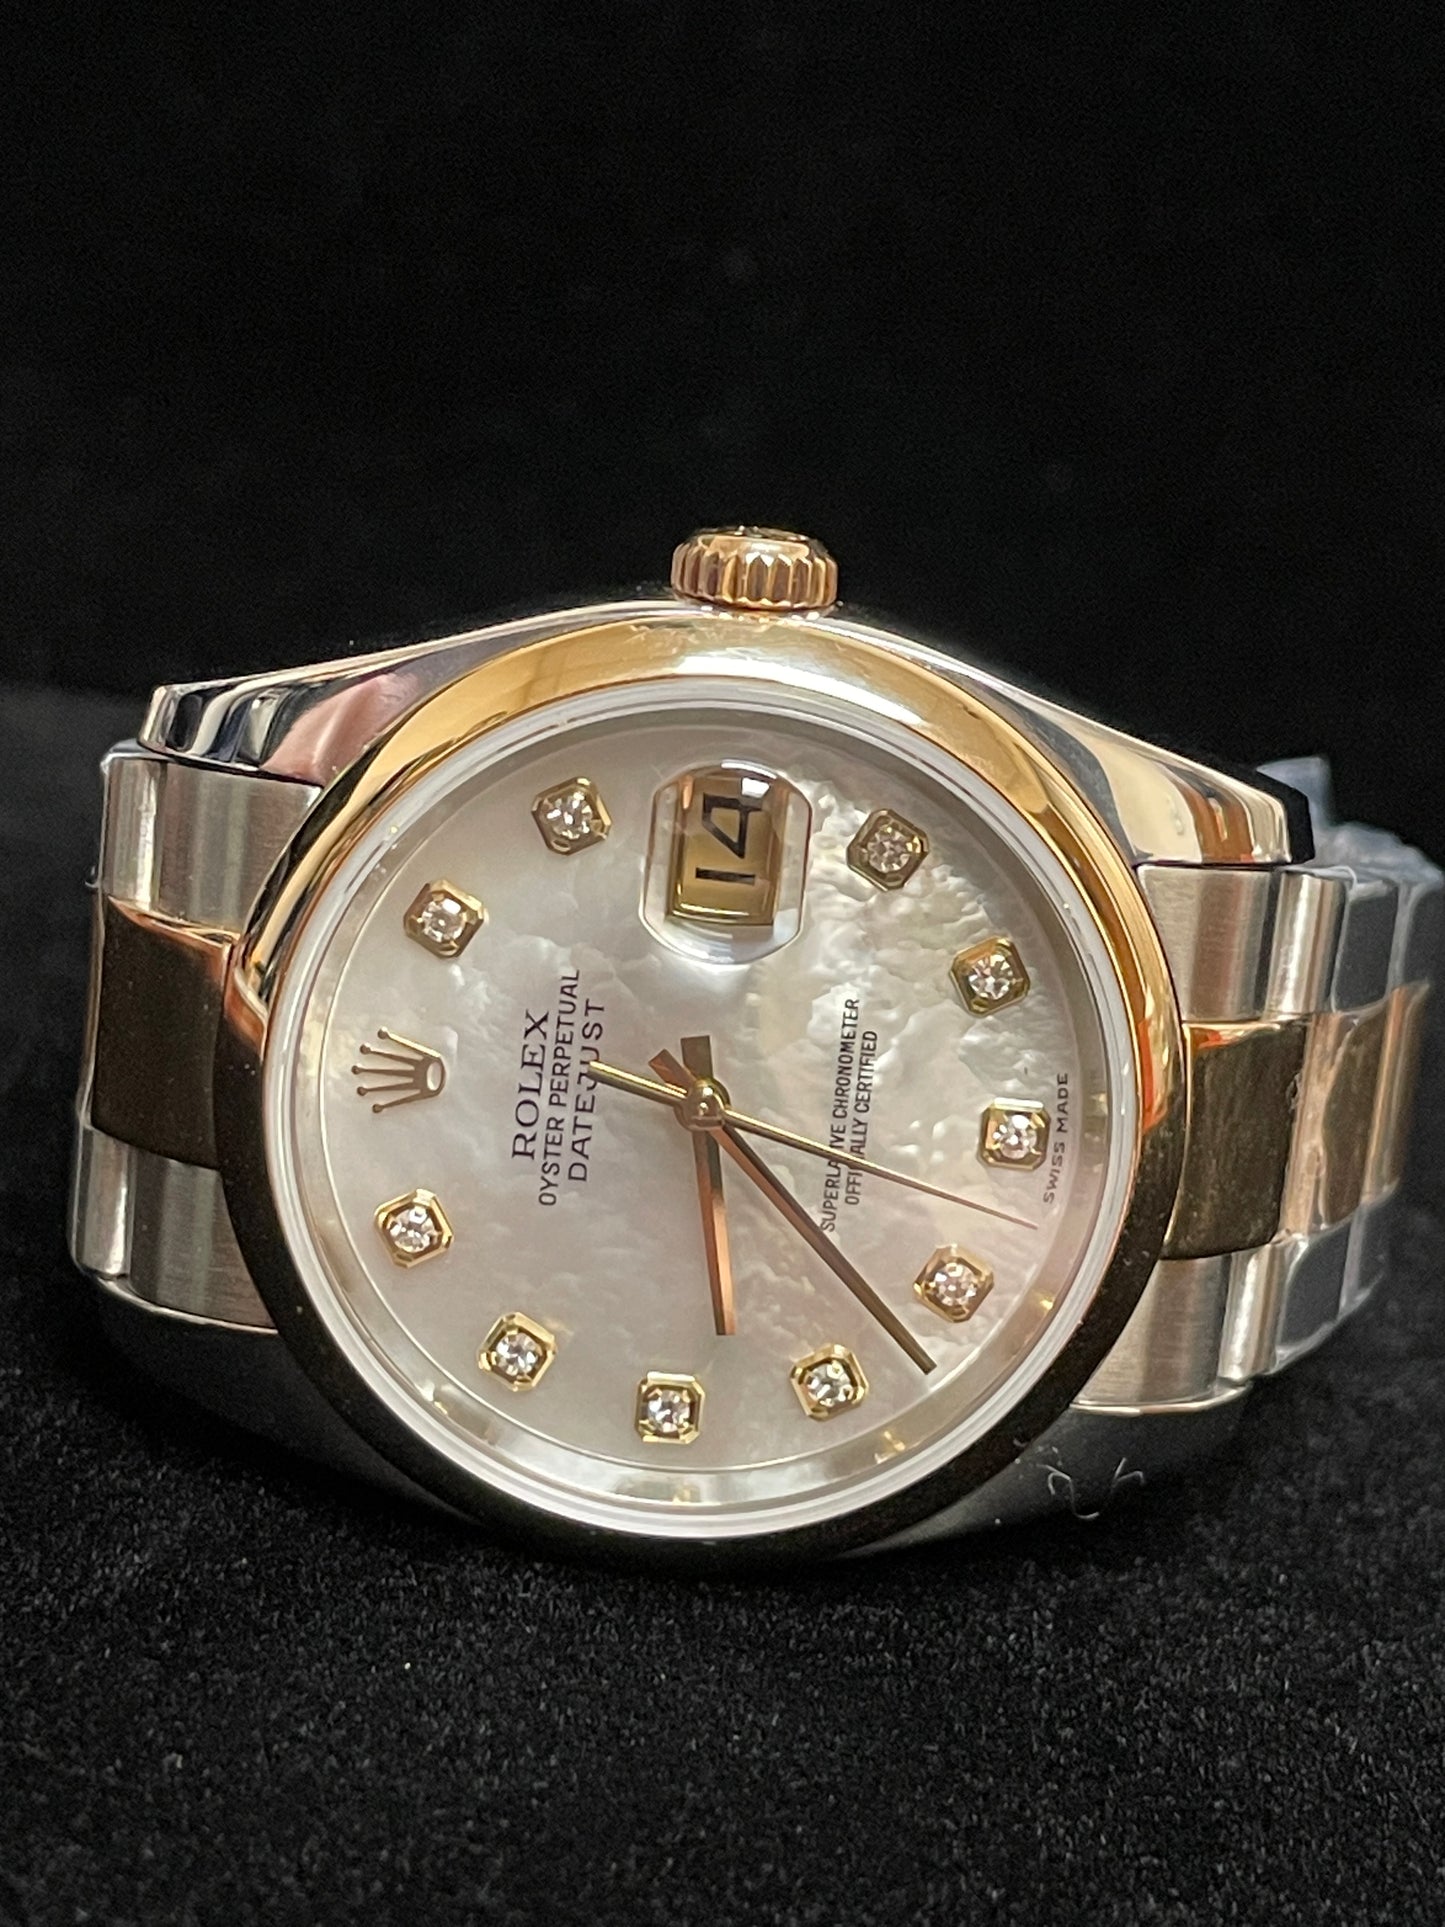 OH 2008 Rolex Datejust 116203 MOP Diamond Dial TT Oyster W Papers 36mm